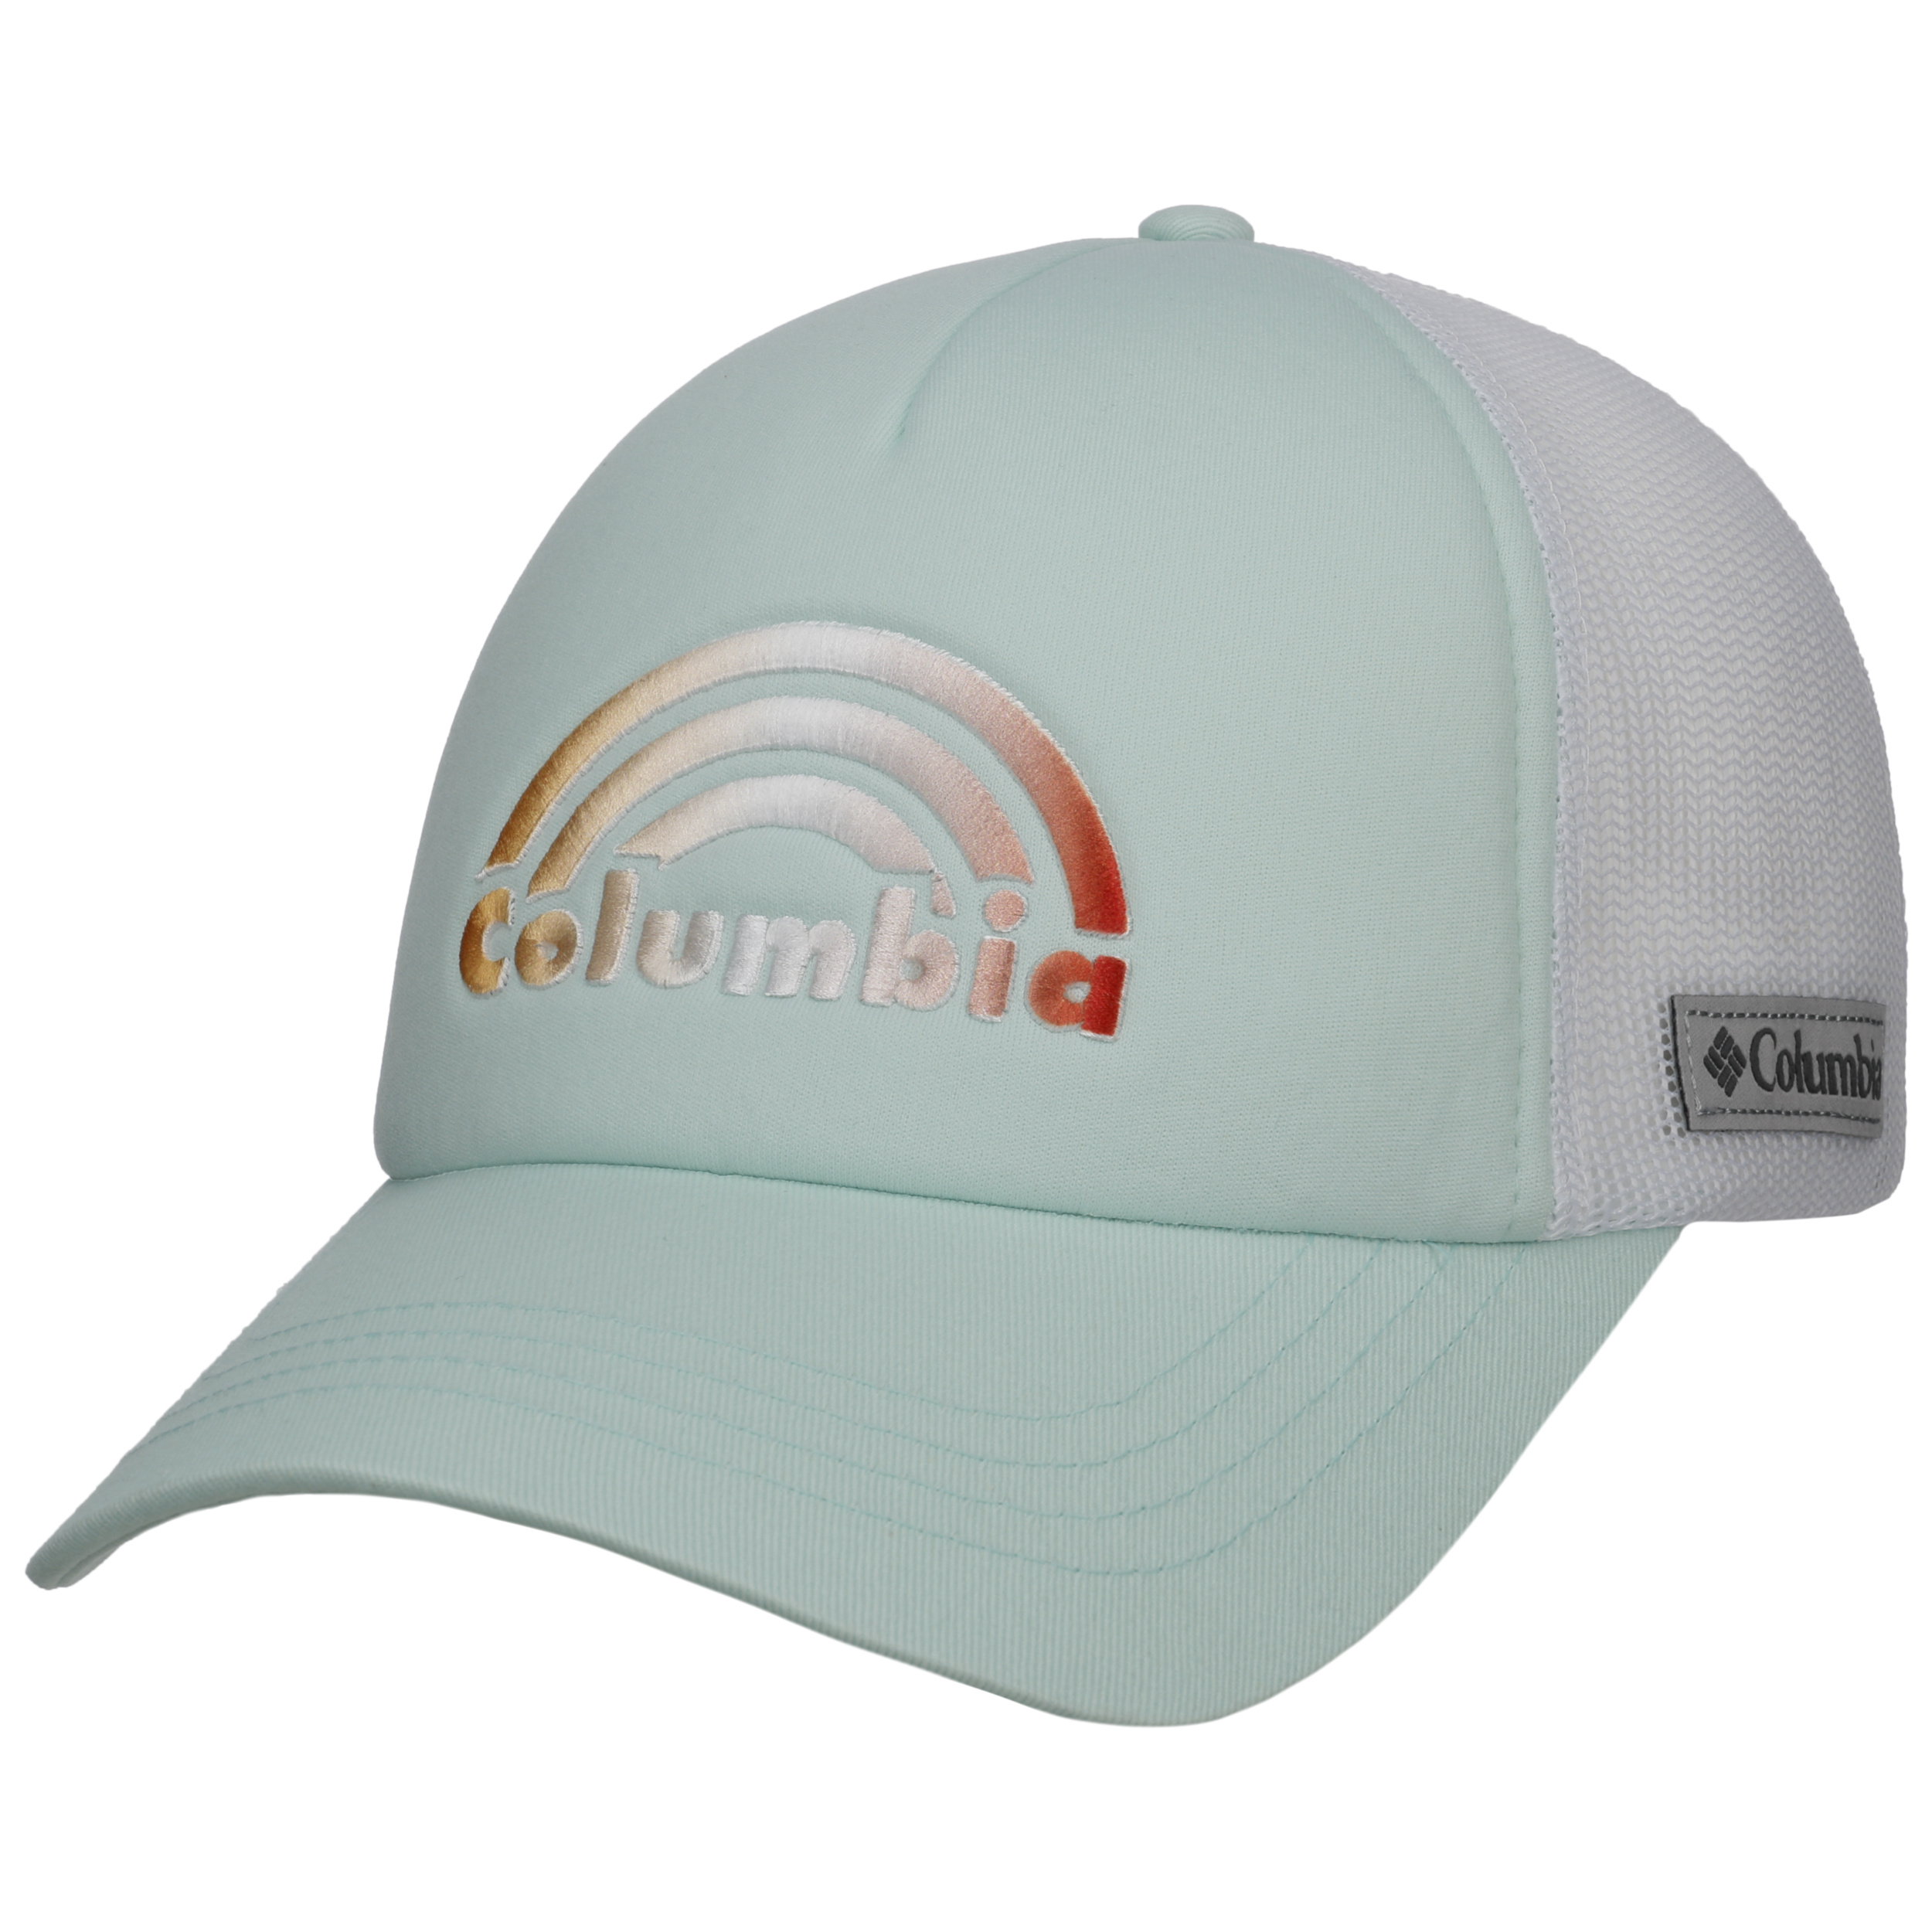 Floral Mesh Cap II by Columbia